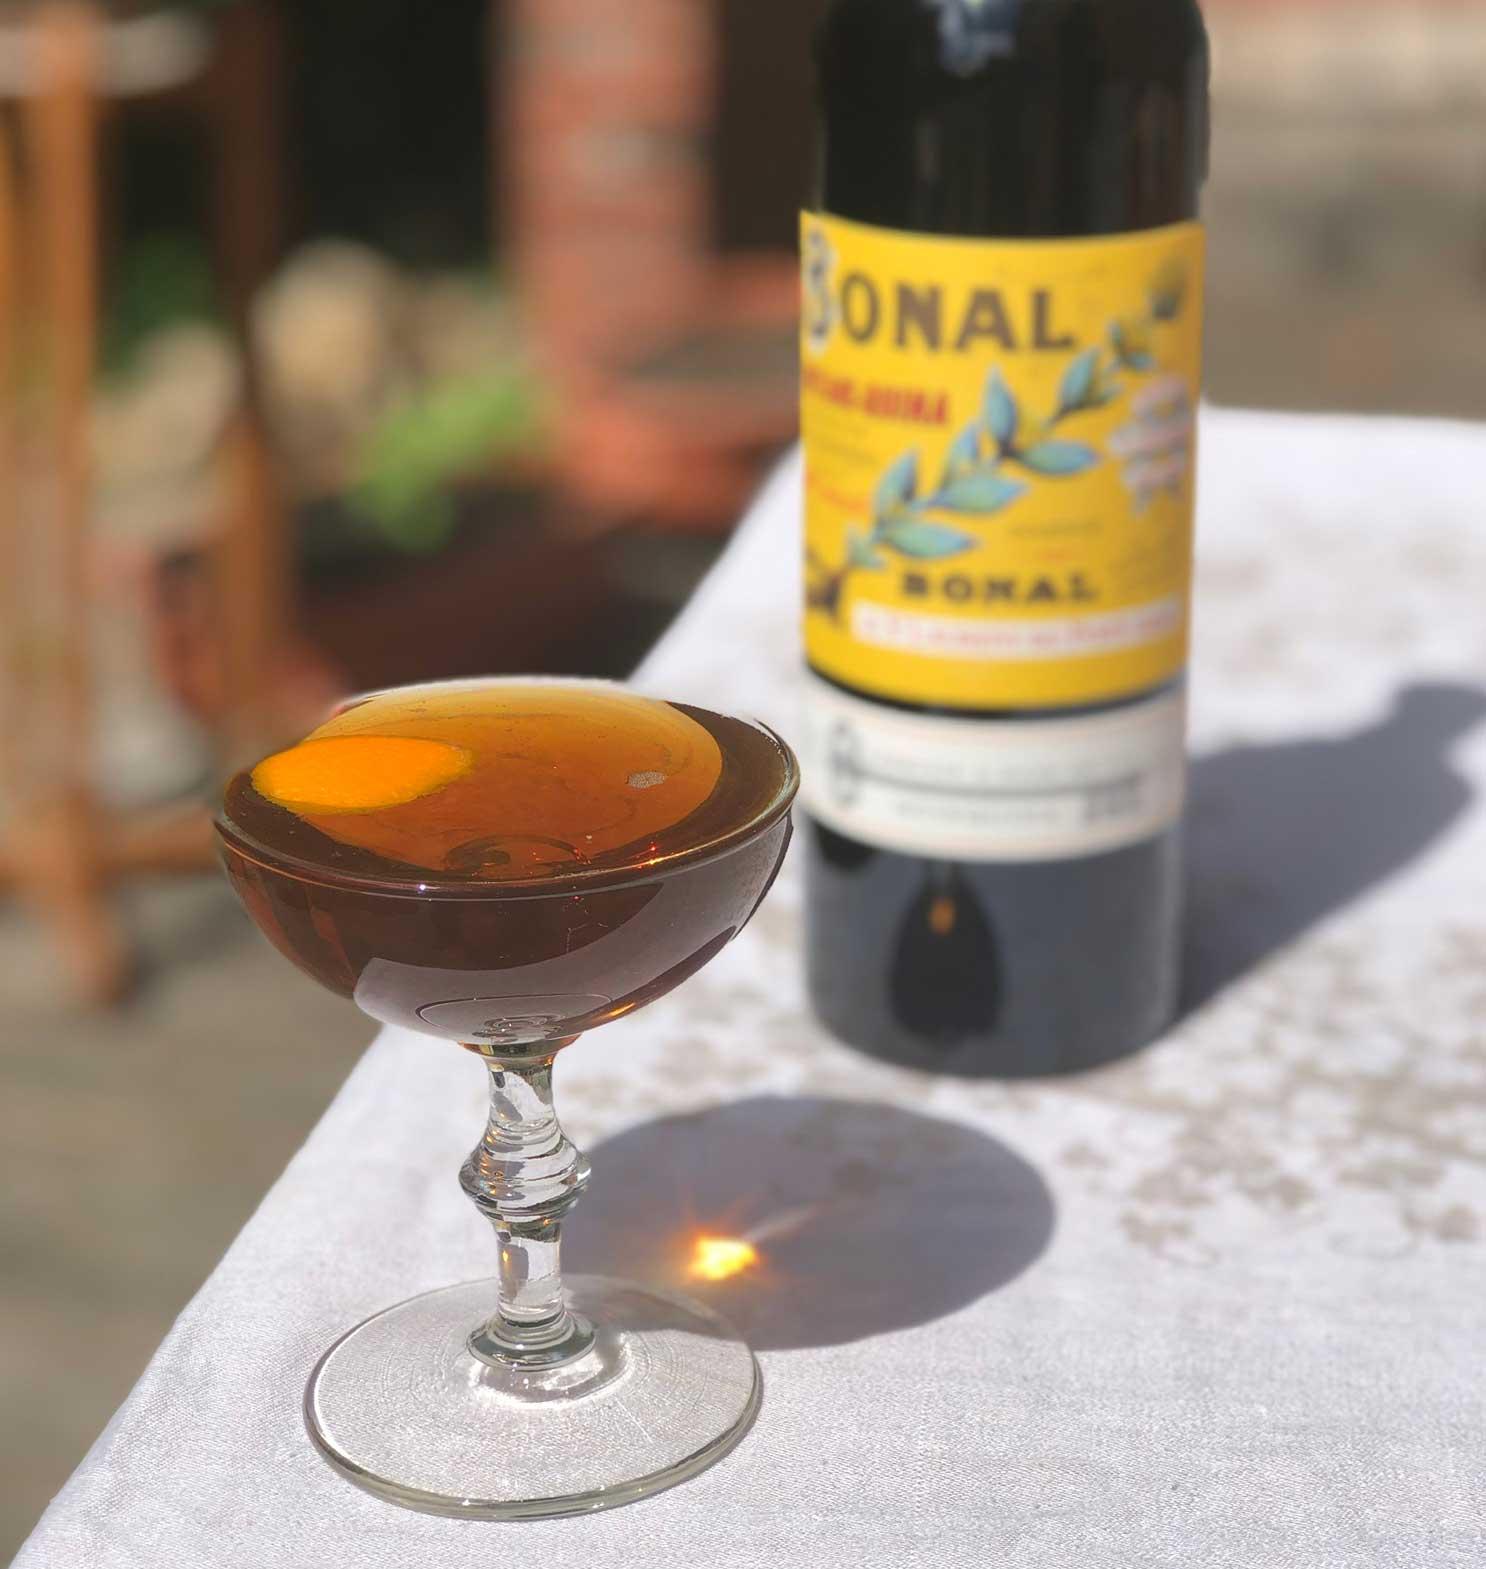 An example of the Bonal & Rye, the mixed drink (drink), by Todd Smith, San Francisco, featuring rye whiskey, Bonal Gentiane-Quina, orange bitters, Angostura bitters, and orange twist